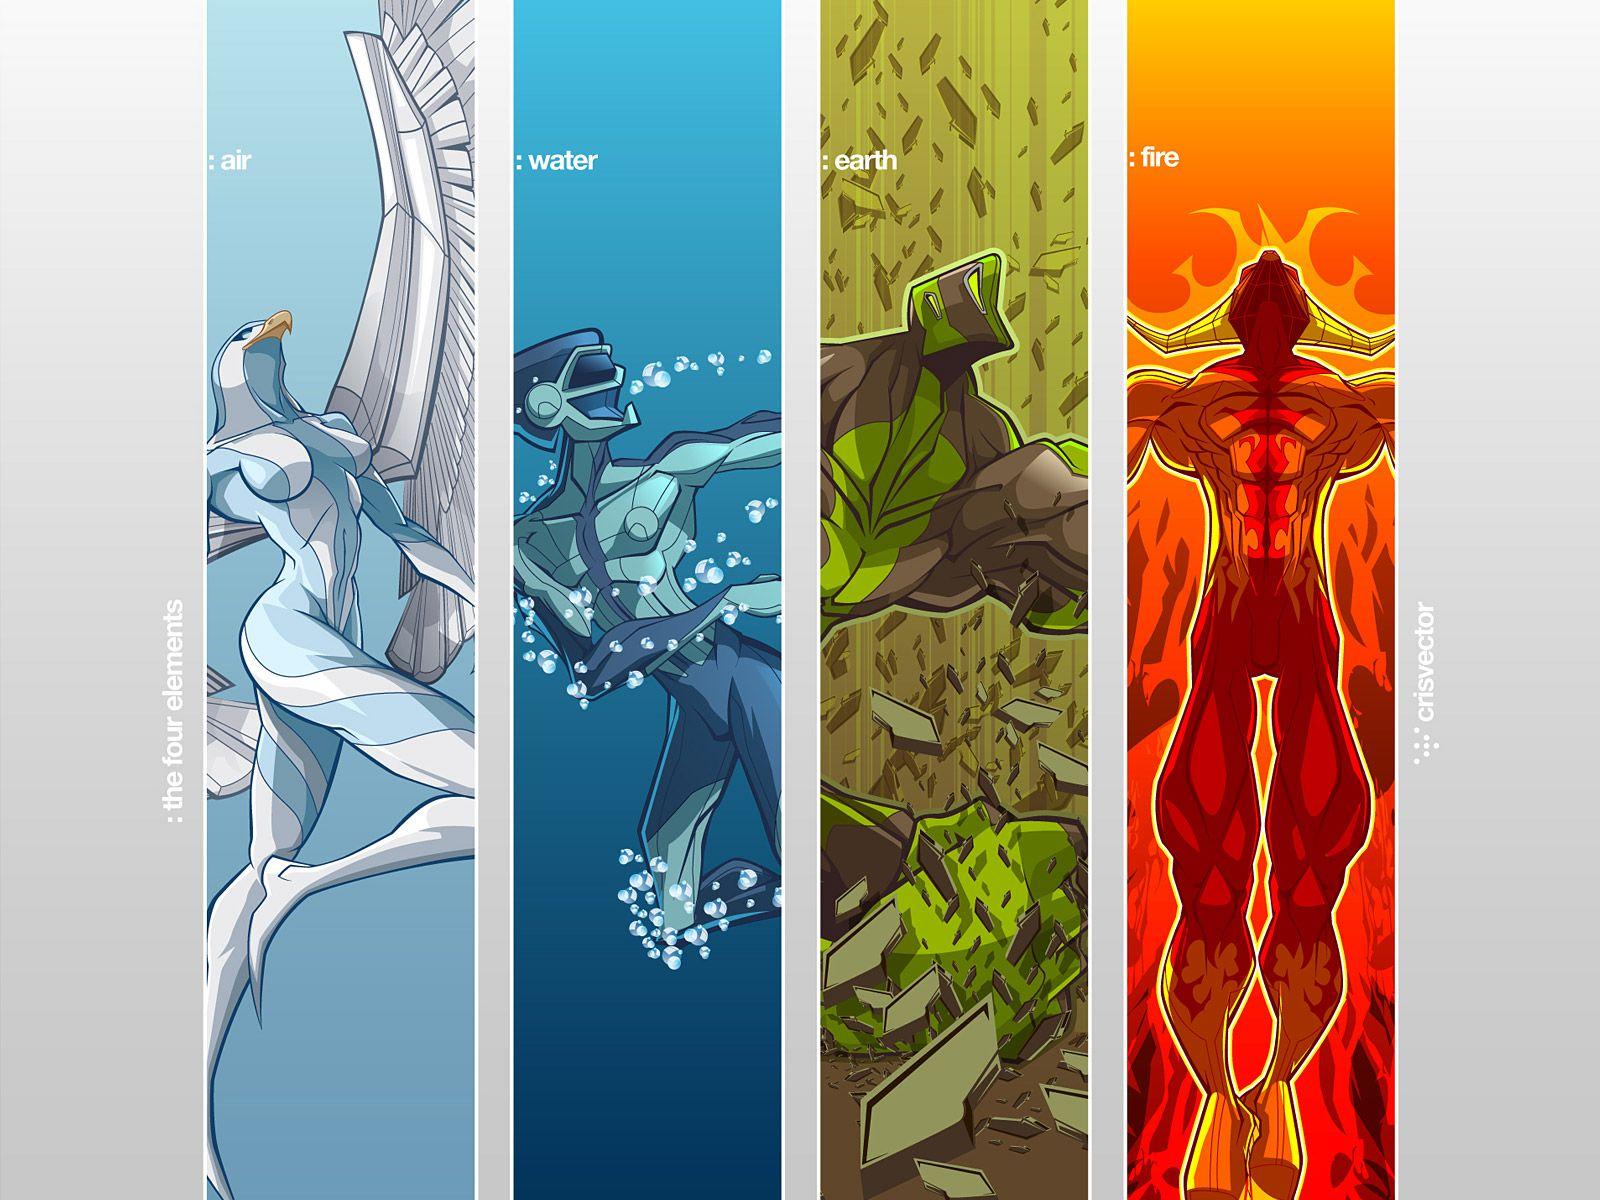 4 elements of nature trippy